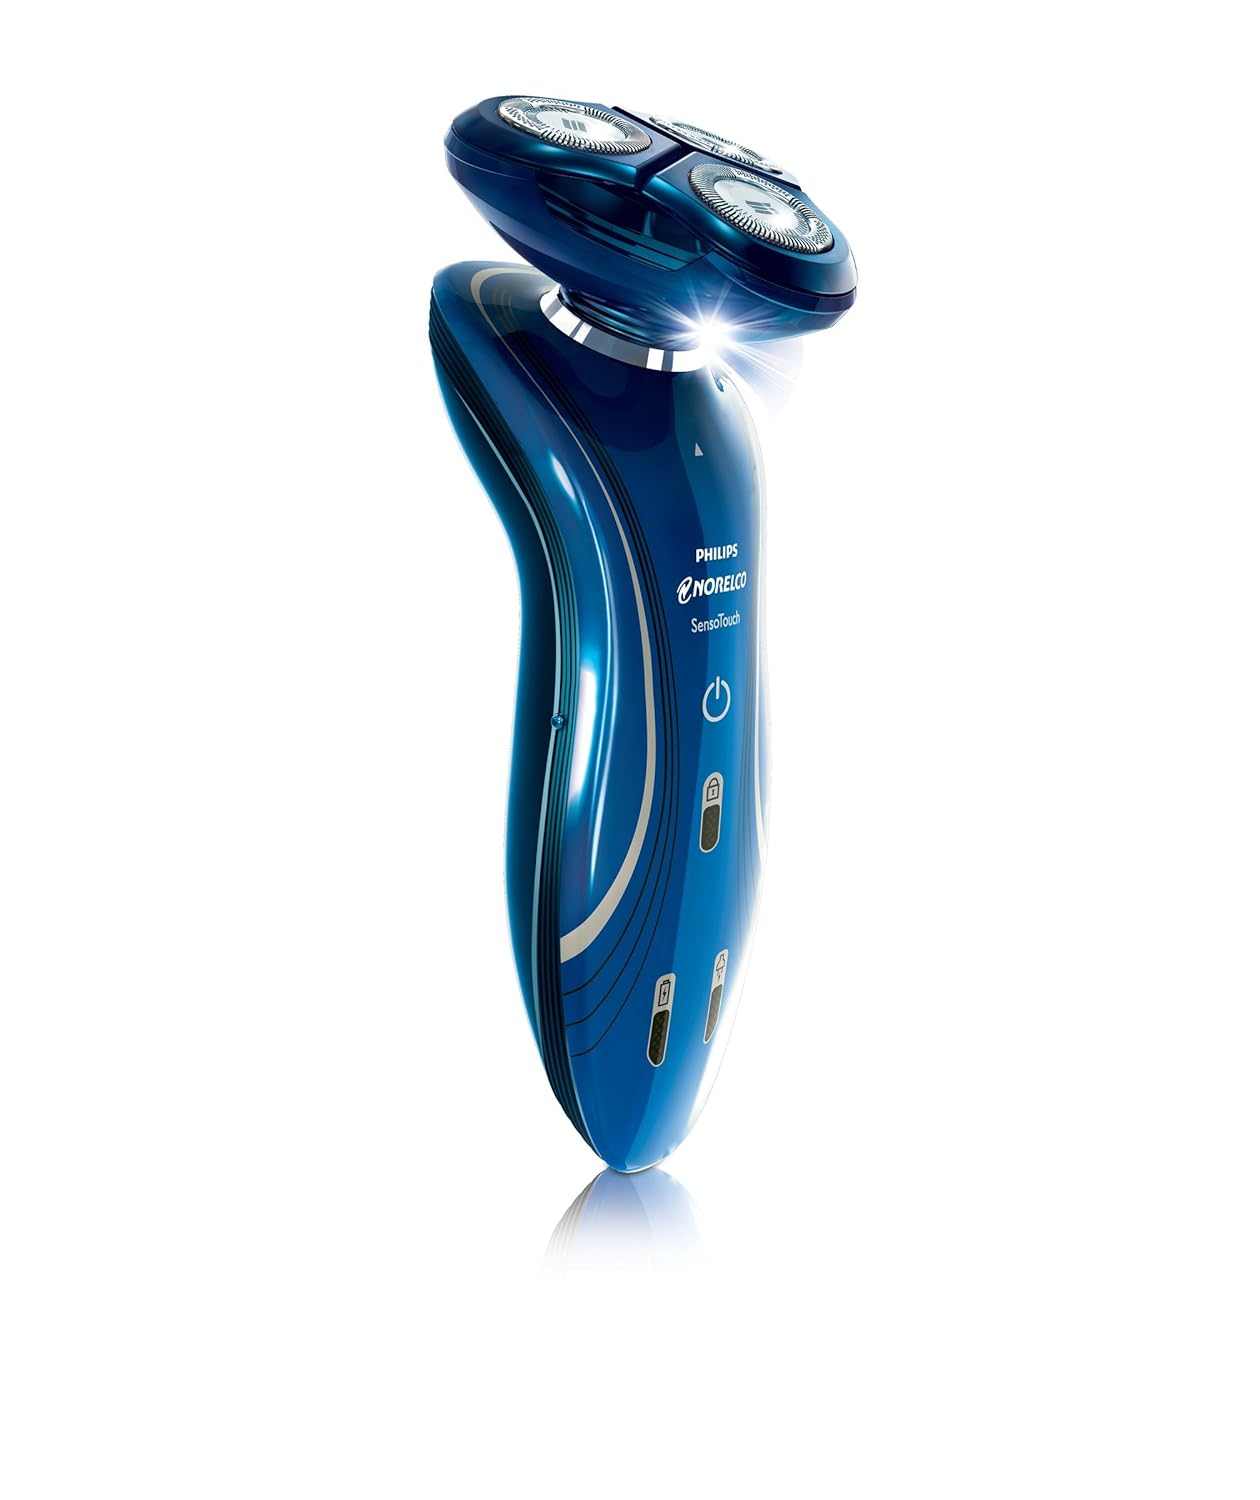 Philips Norelco 1150x/40 SensoTouch 2d Electric Shaver, Metallic Blue